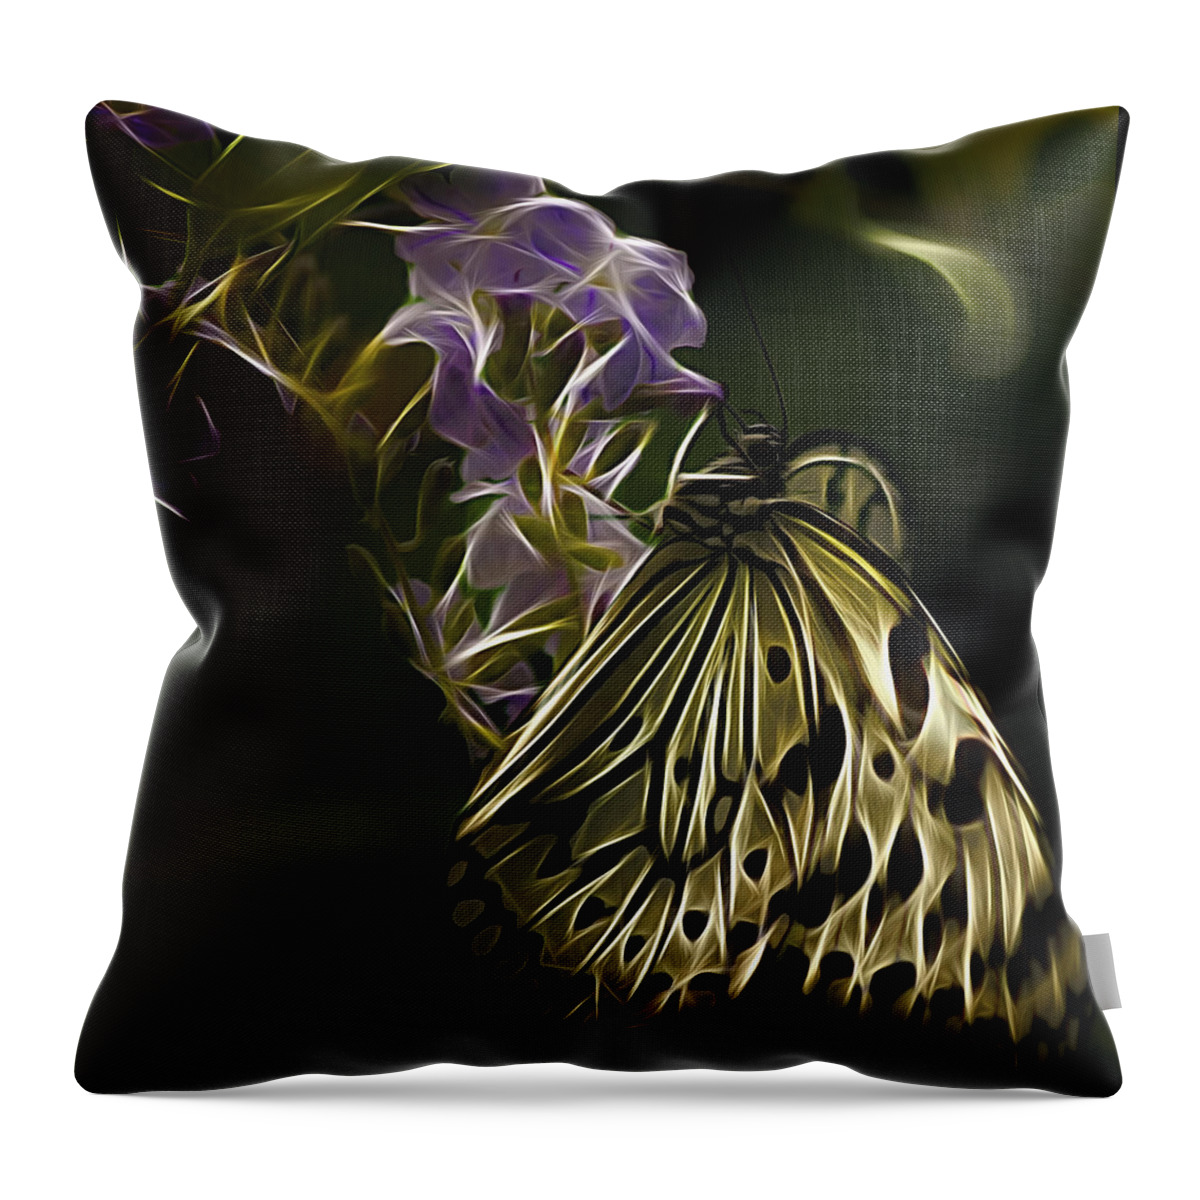 Paper Kite Butterfly Throw Pillow featuring the photograph Paper Kite Butterfly by Linda Tiepelman